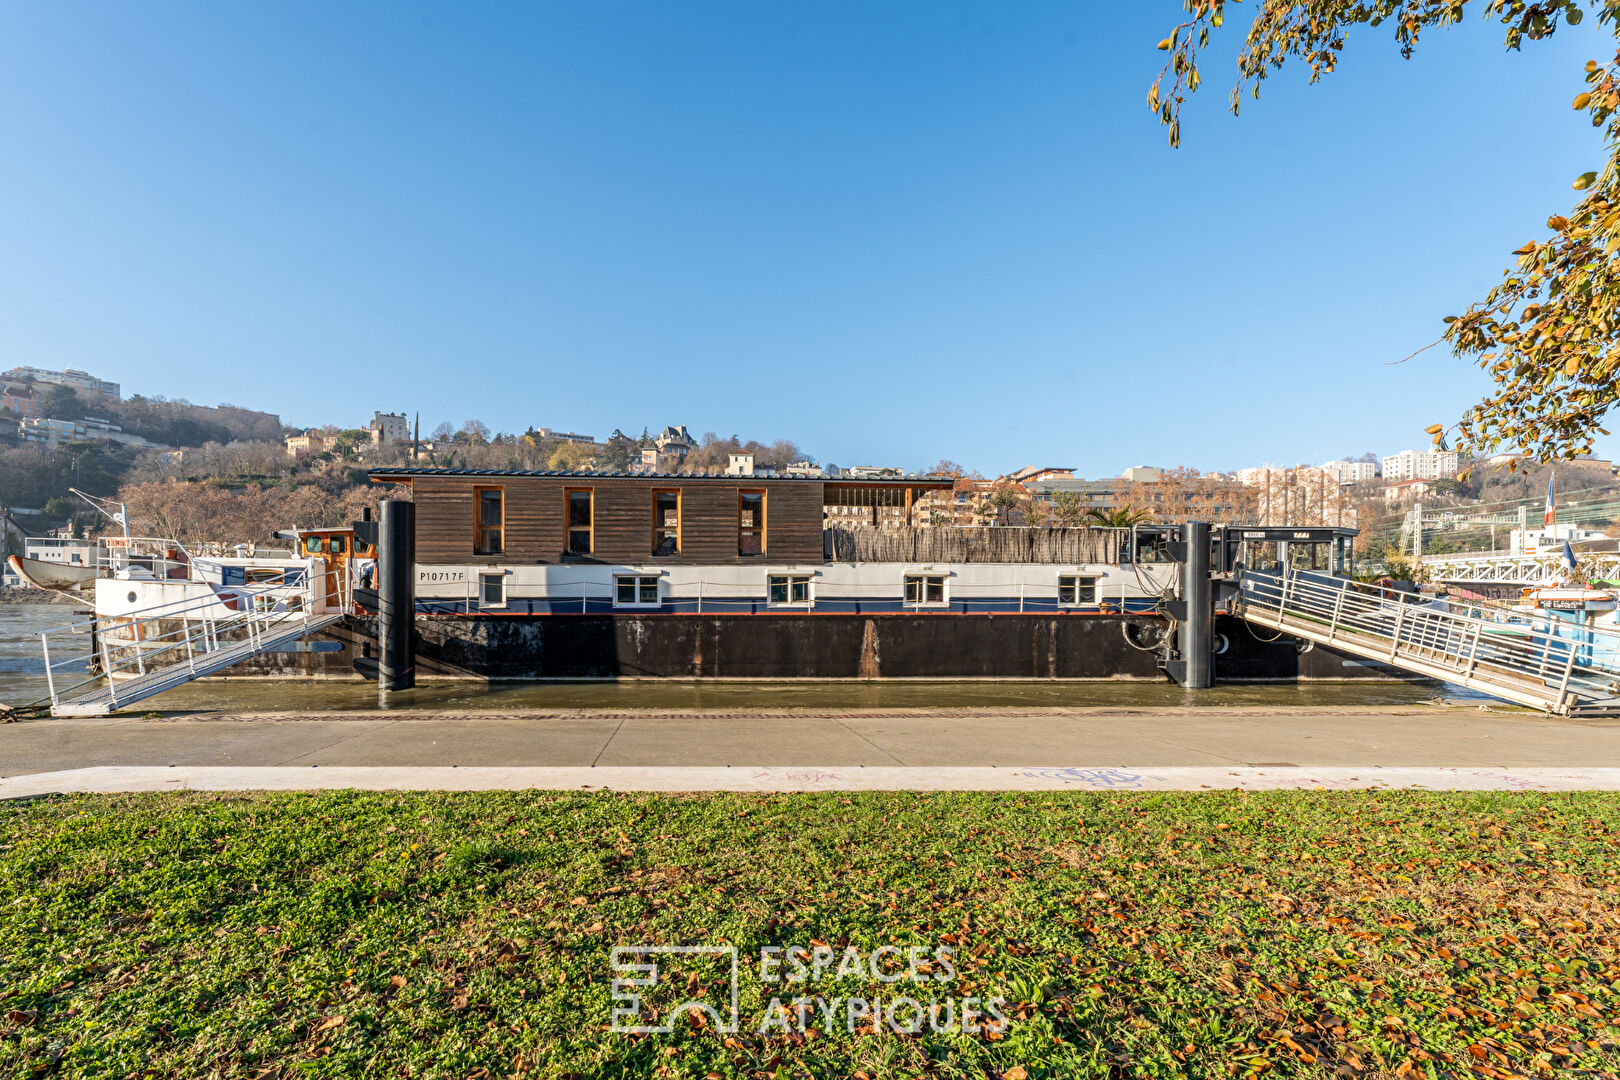 Magnificent Freycinet barge in the heart of Lyon